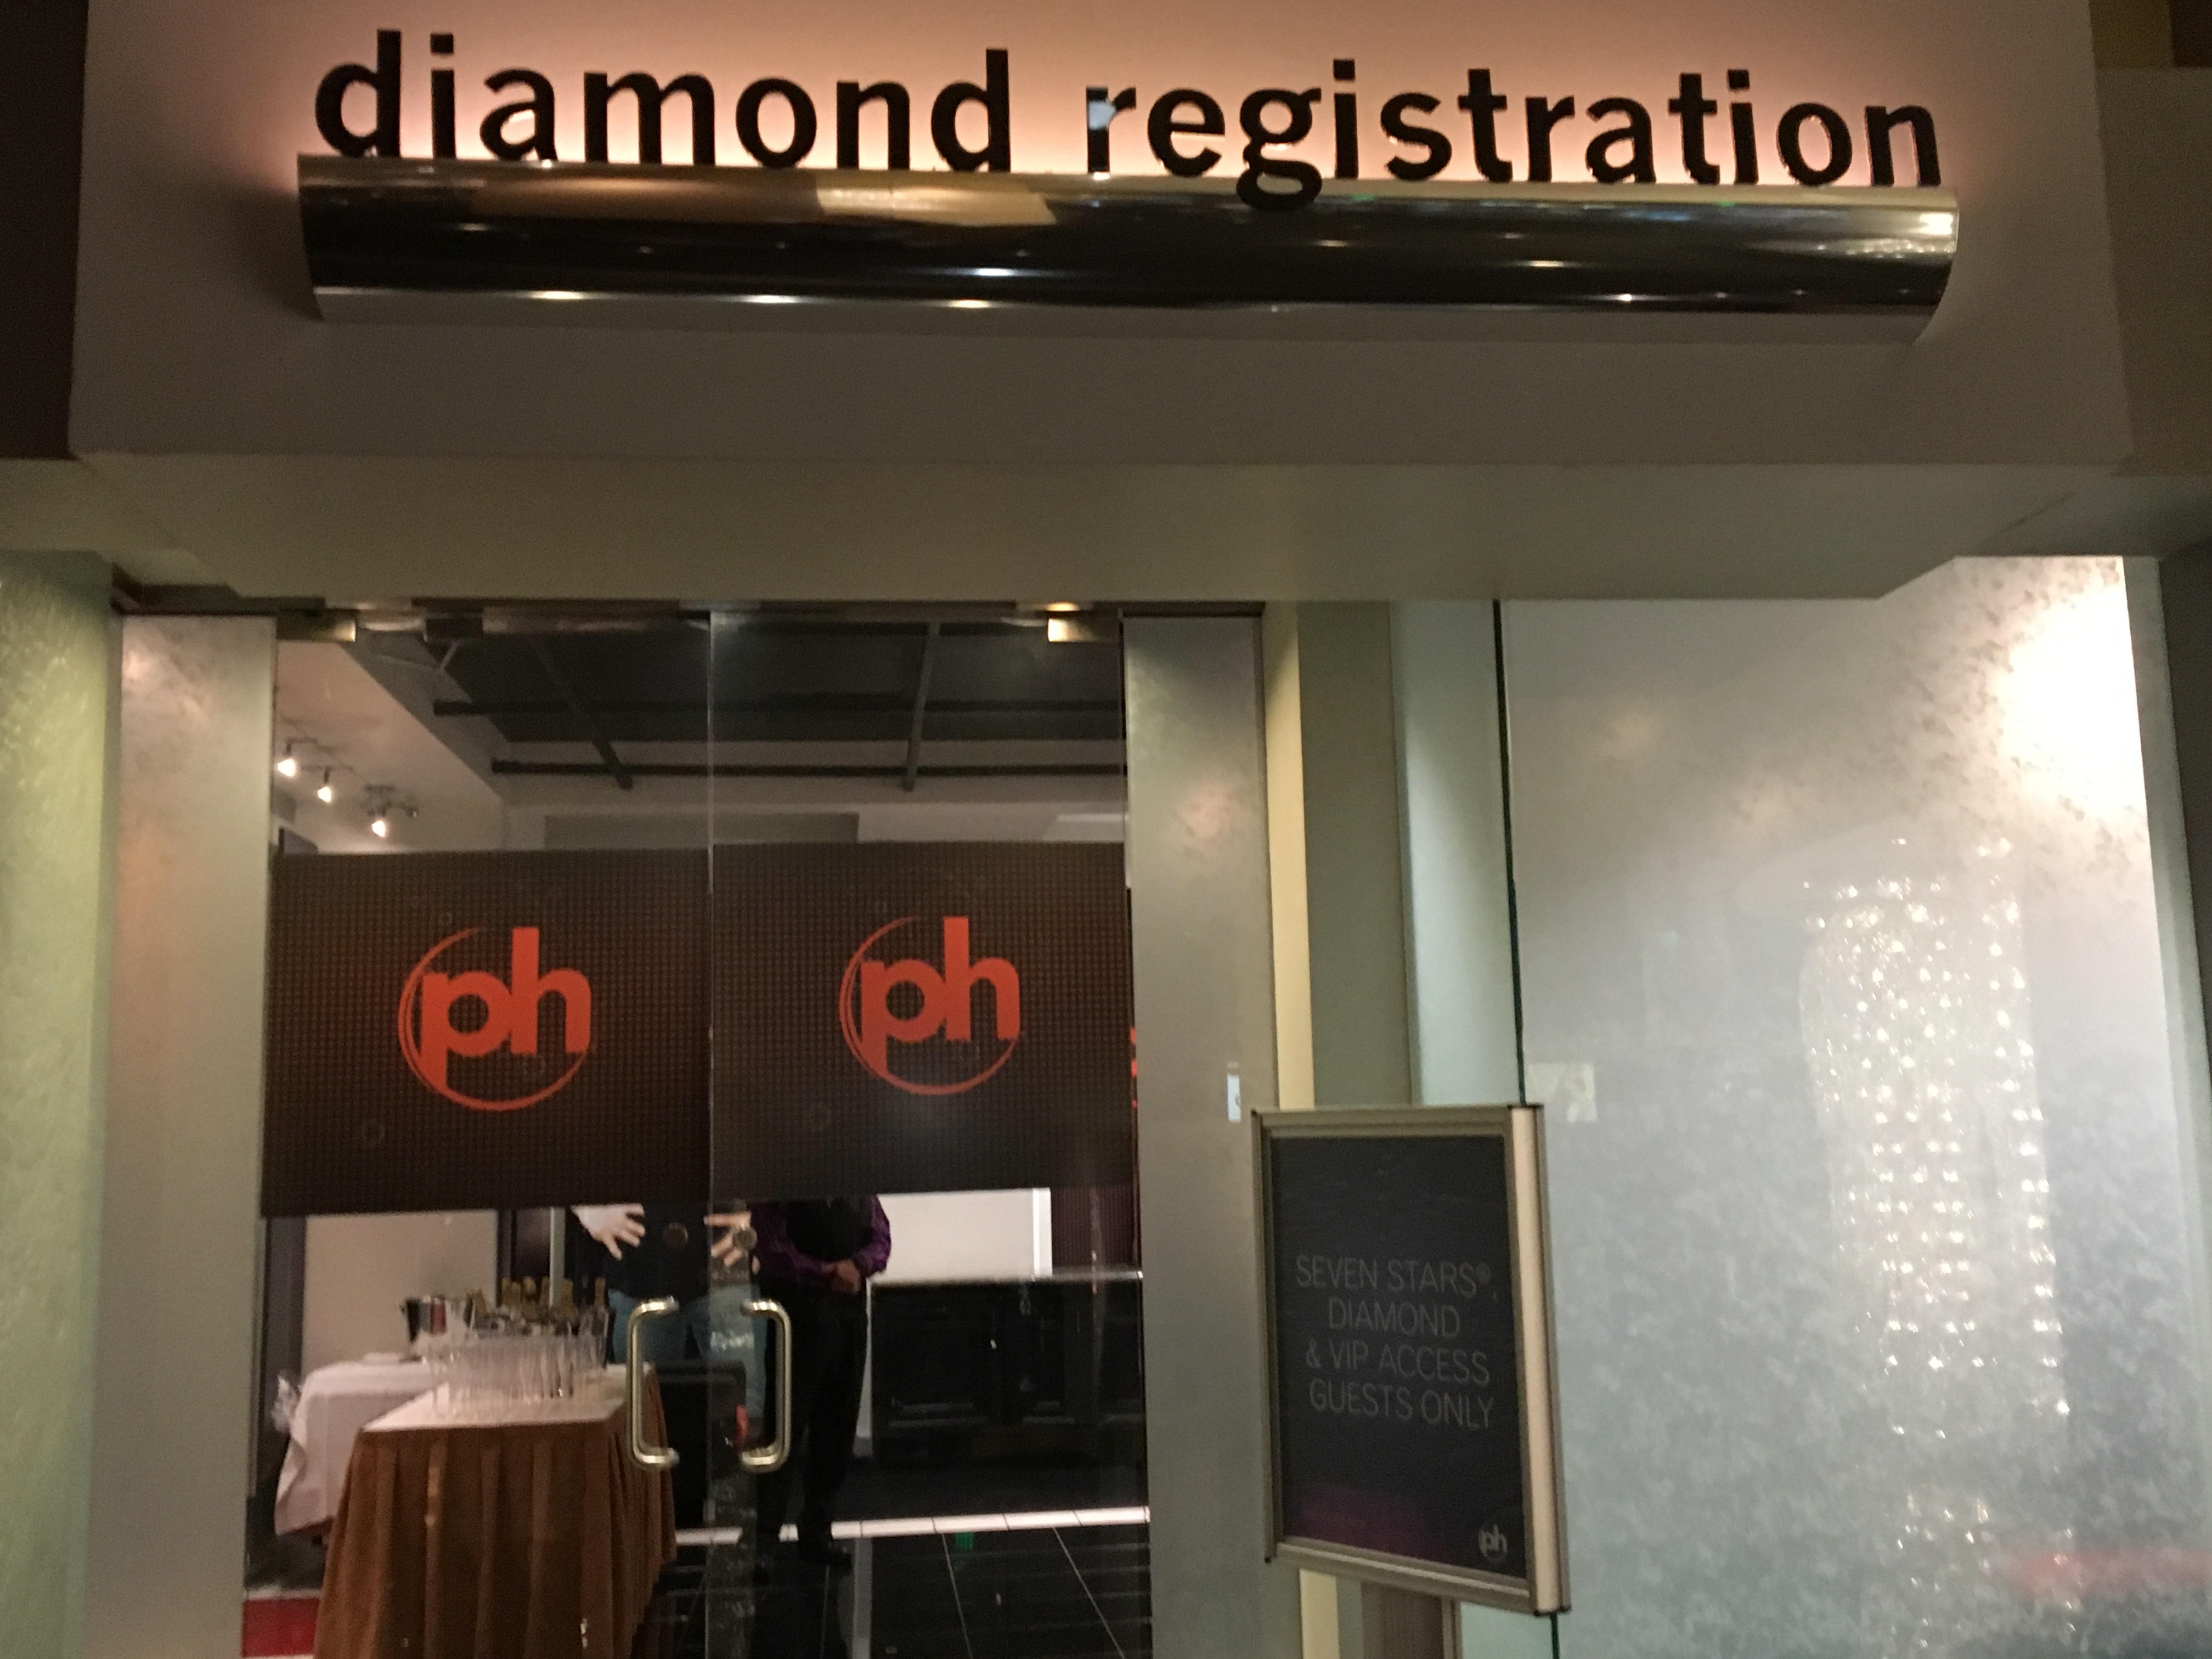 The entrance to the PH Diamond Registration Lounge